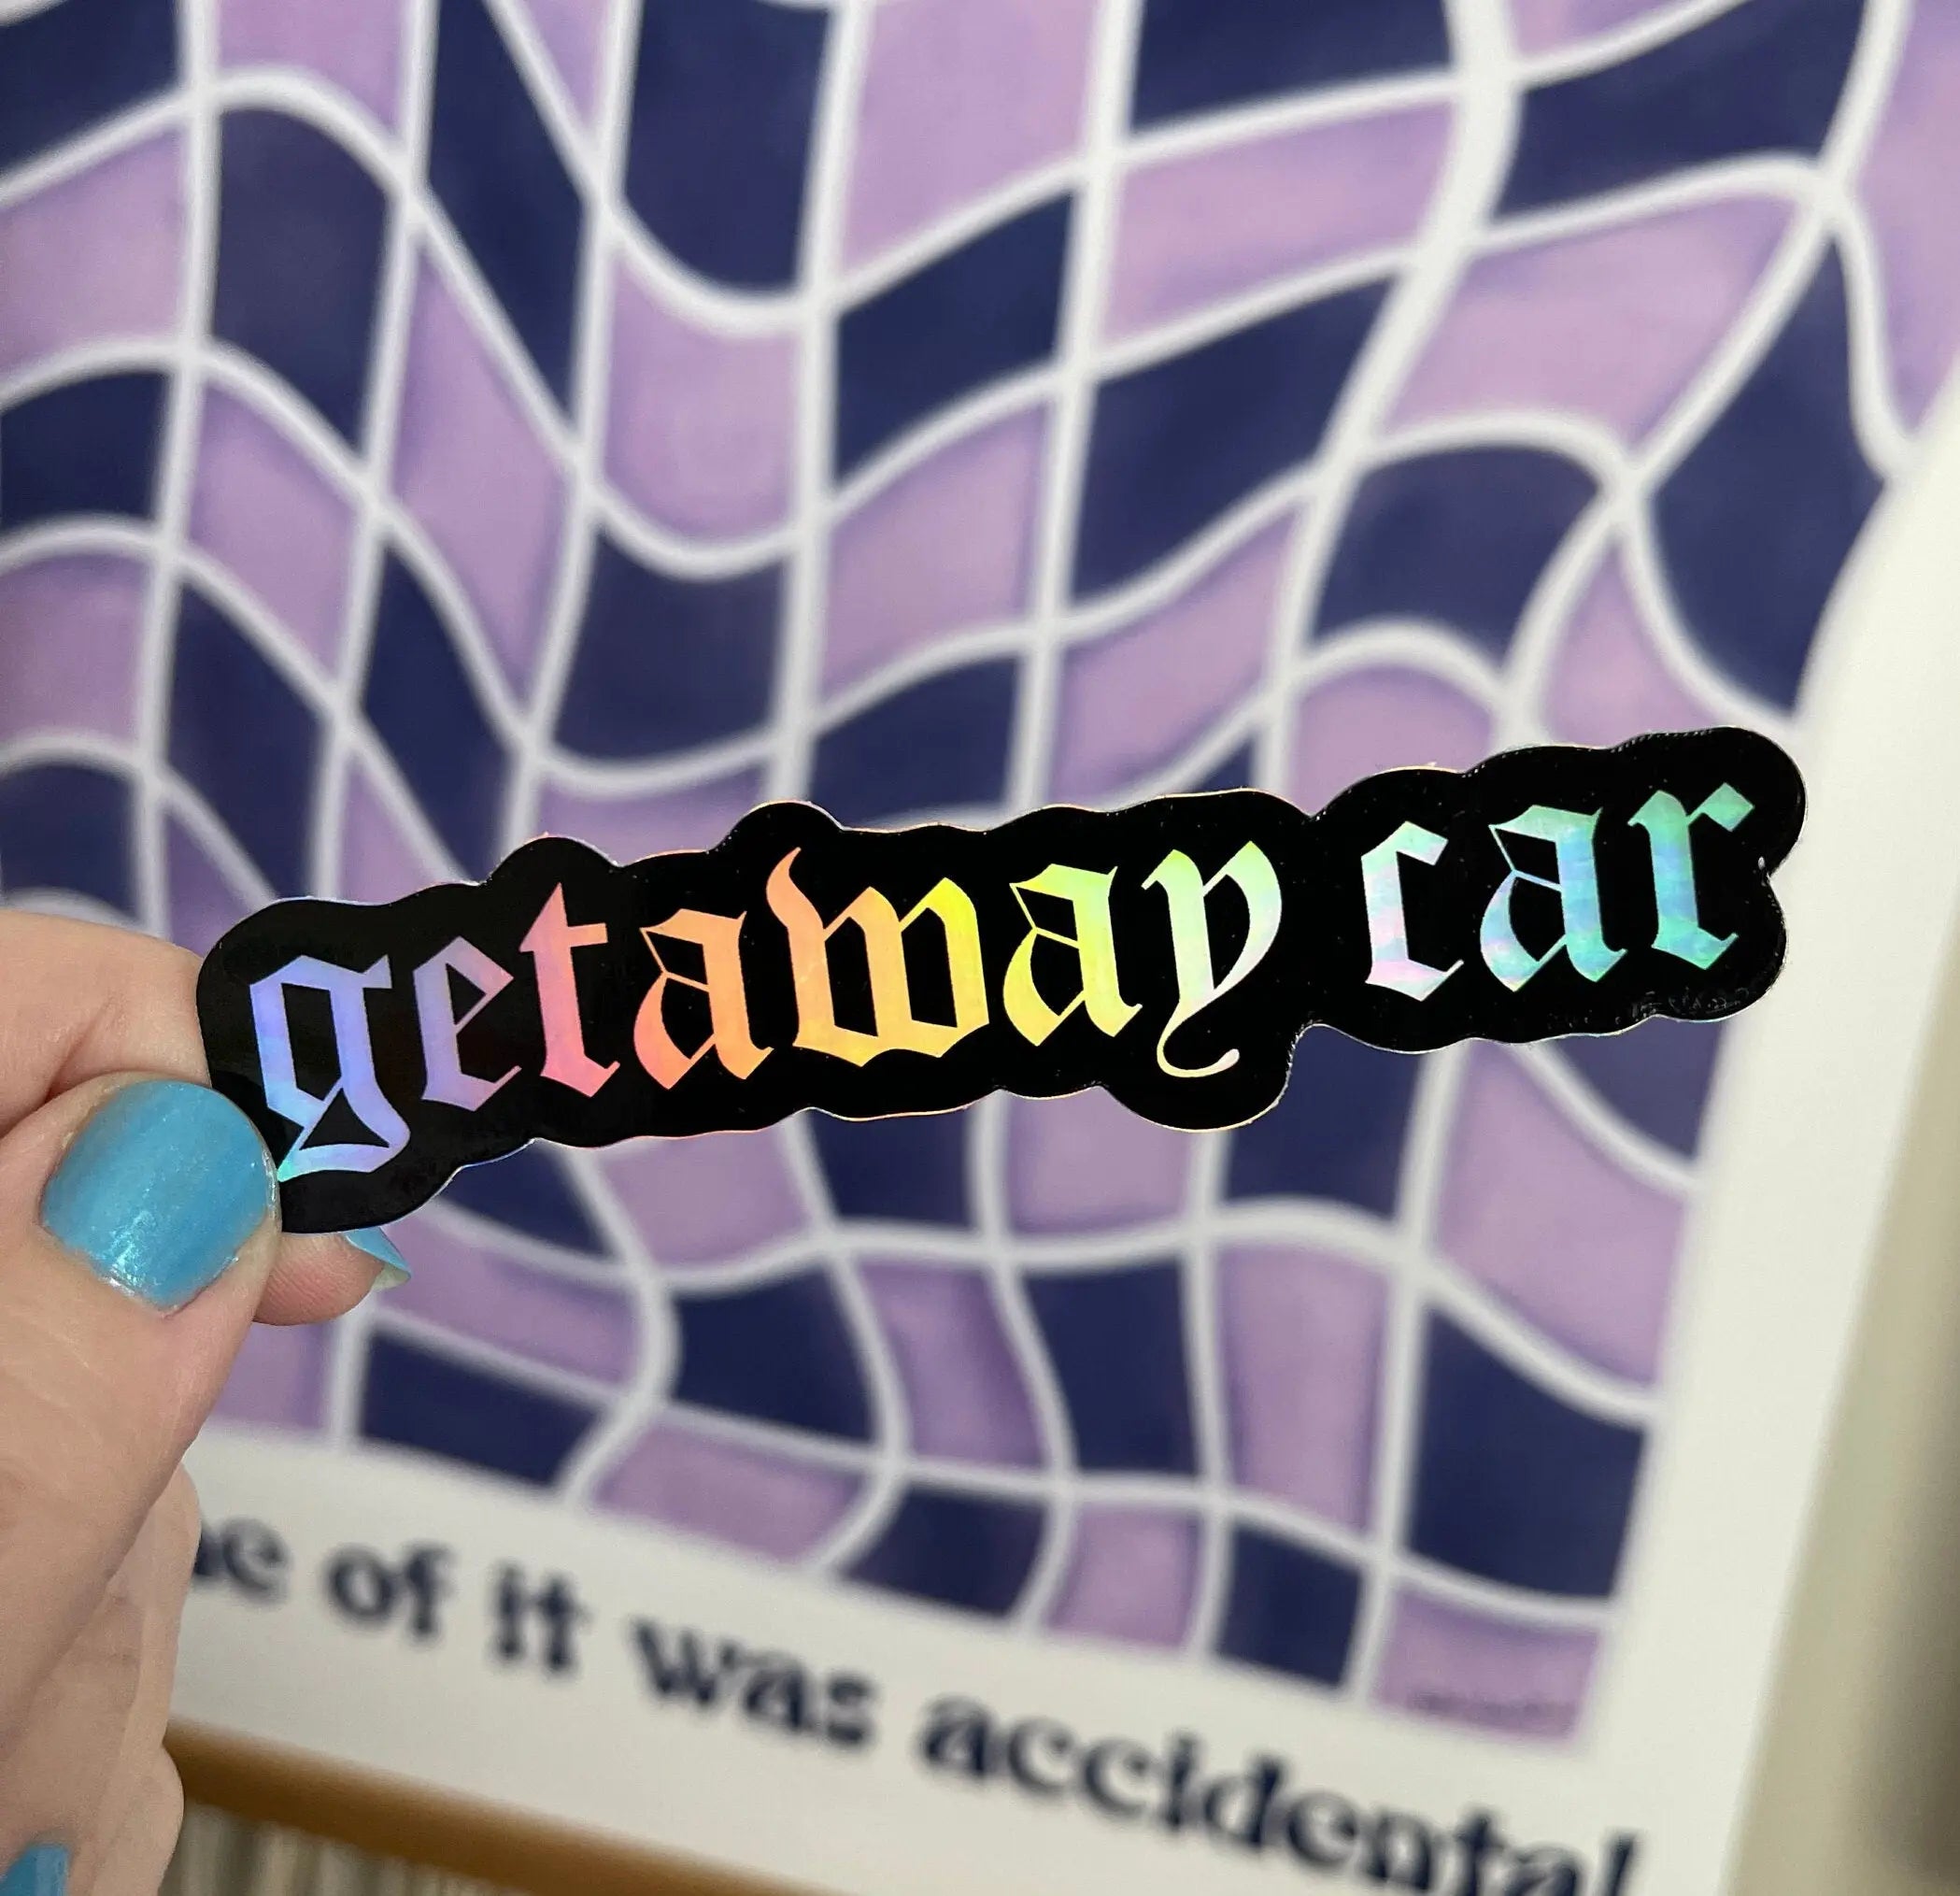 Getaway Car holographic sticker MangoIllustrated